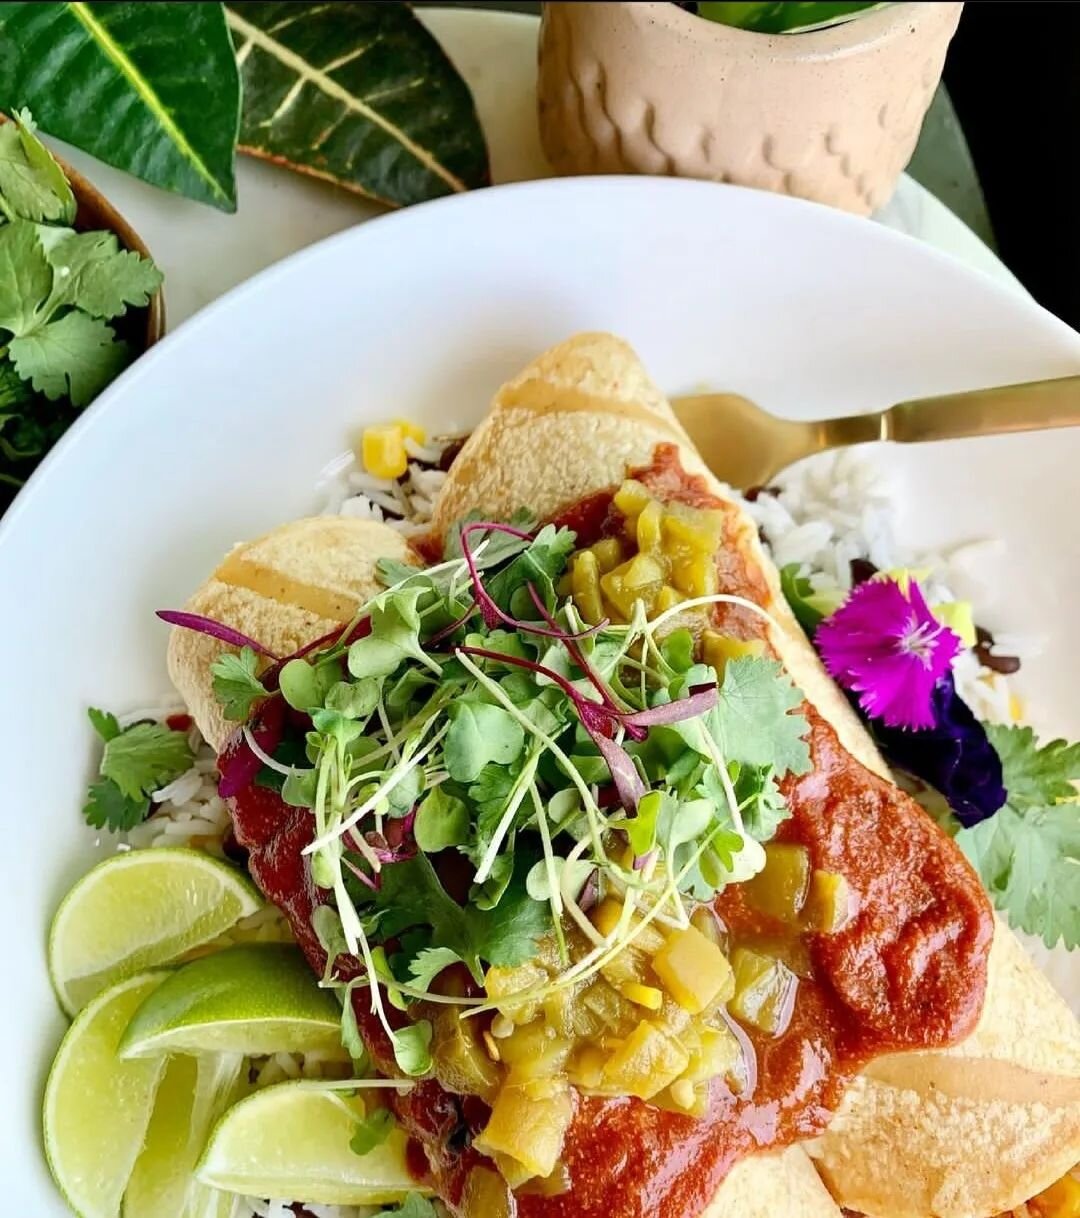 Delicious tacos! 😋 
&bull;
&bull;
&bull;
Picture by @plantversed